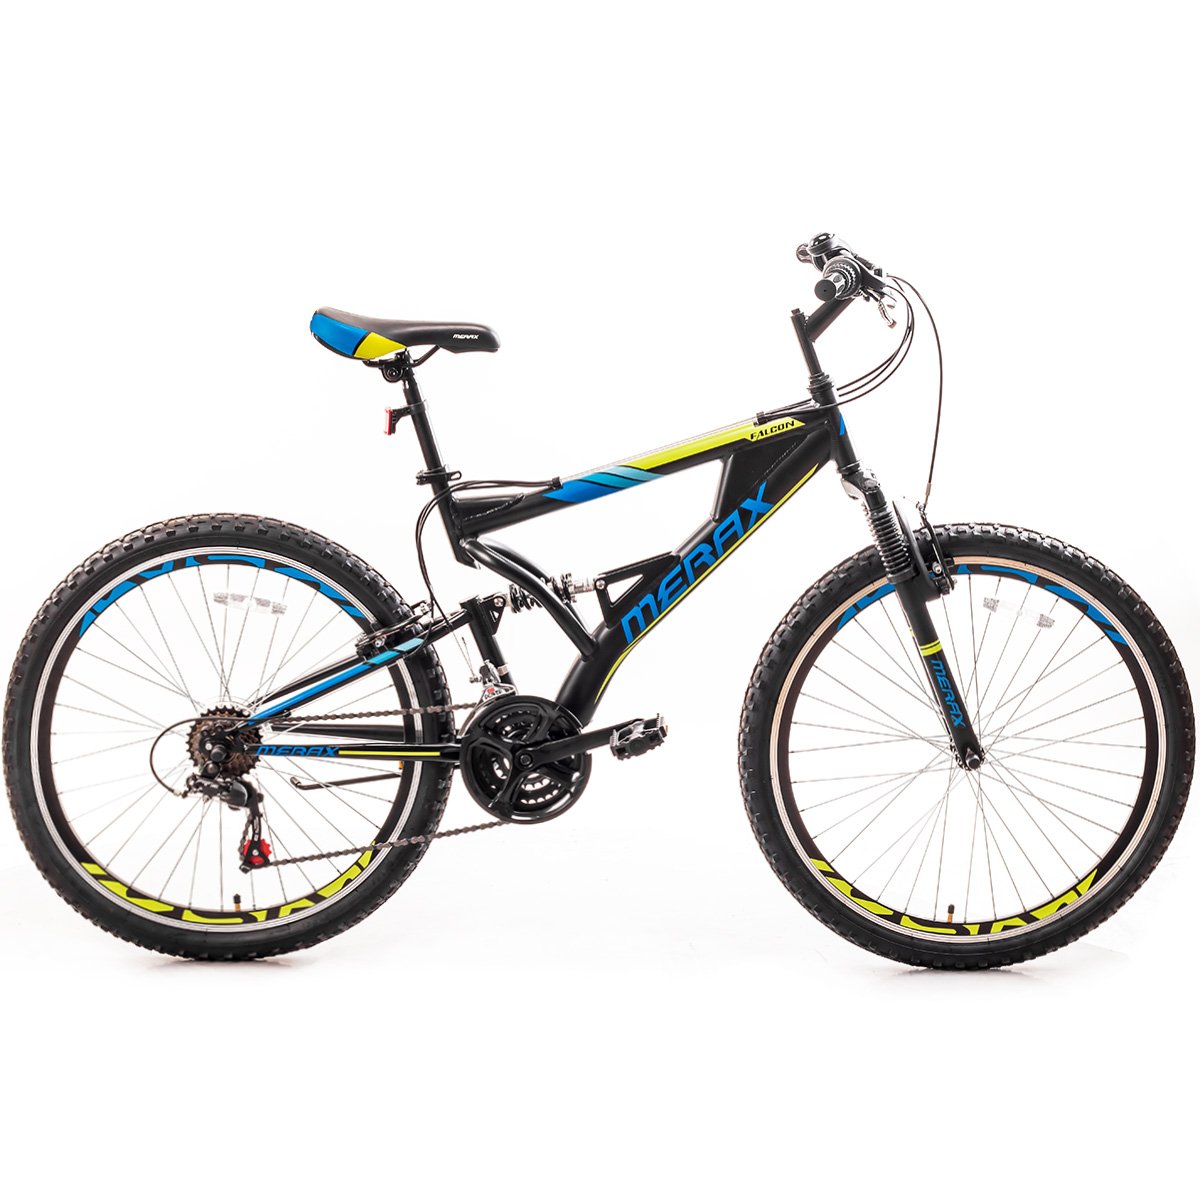 Akonza Cobra 26 Mountain Bicycle Full Suspension 21-Speed Compatible Outdoor MTB Bike